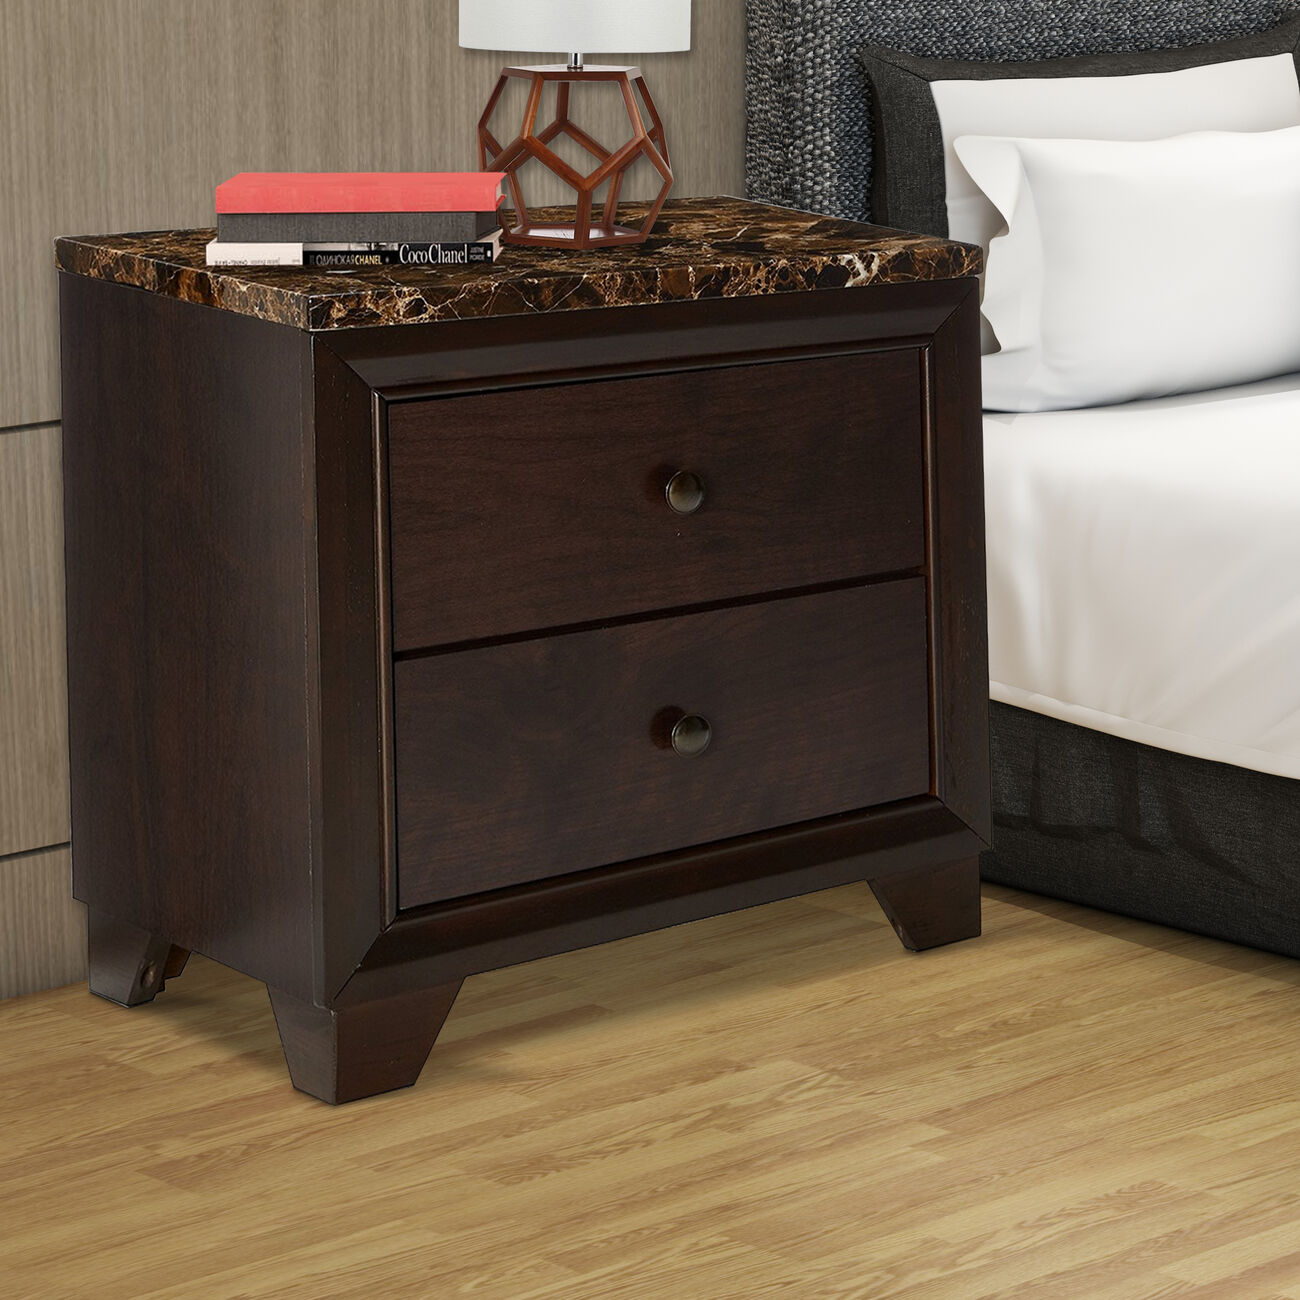 2 Drawer Wooden Nightstand with Faux Marble Top, Cappuccino Brown